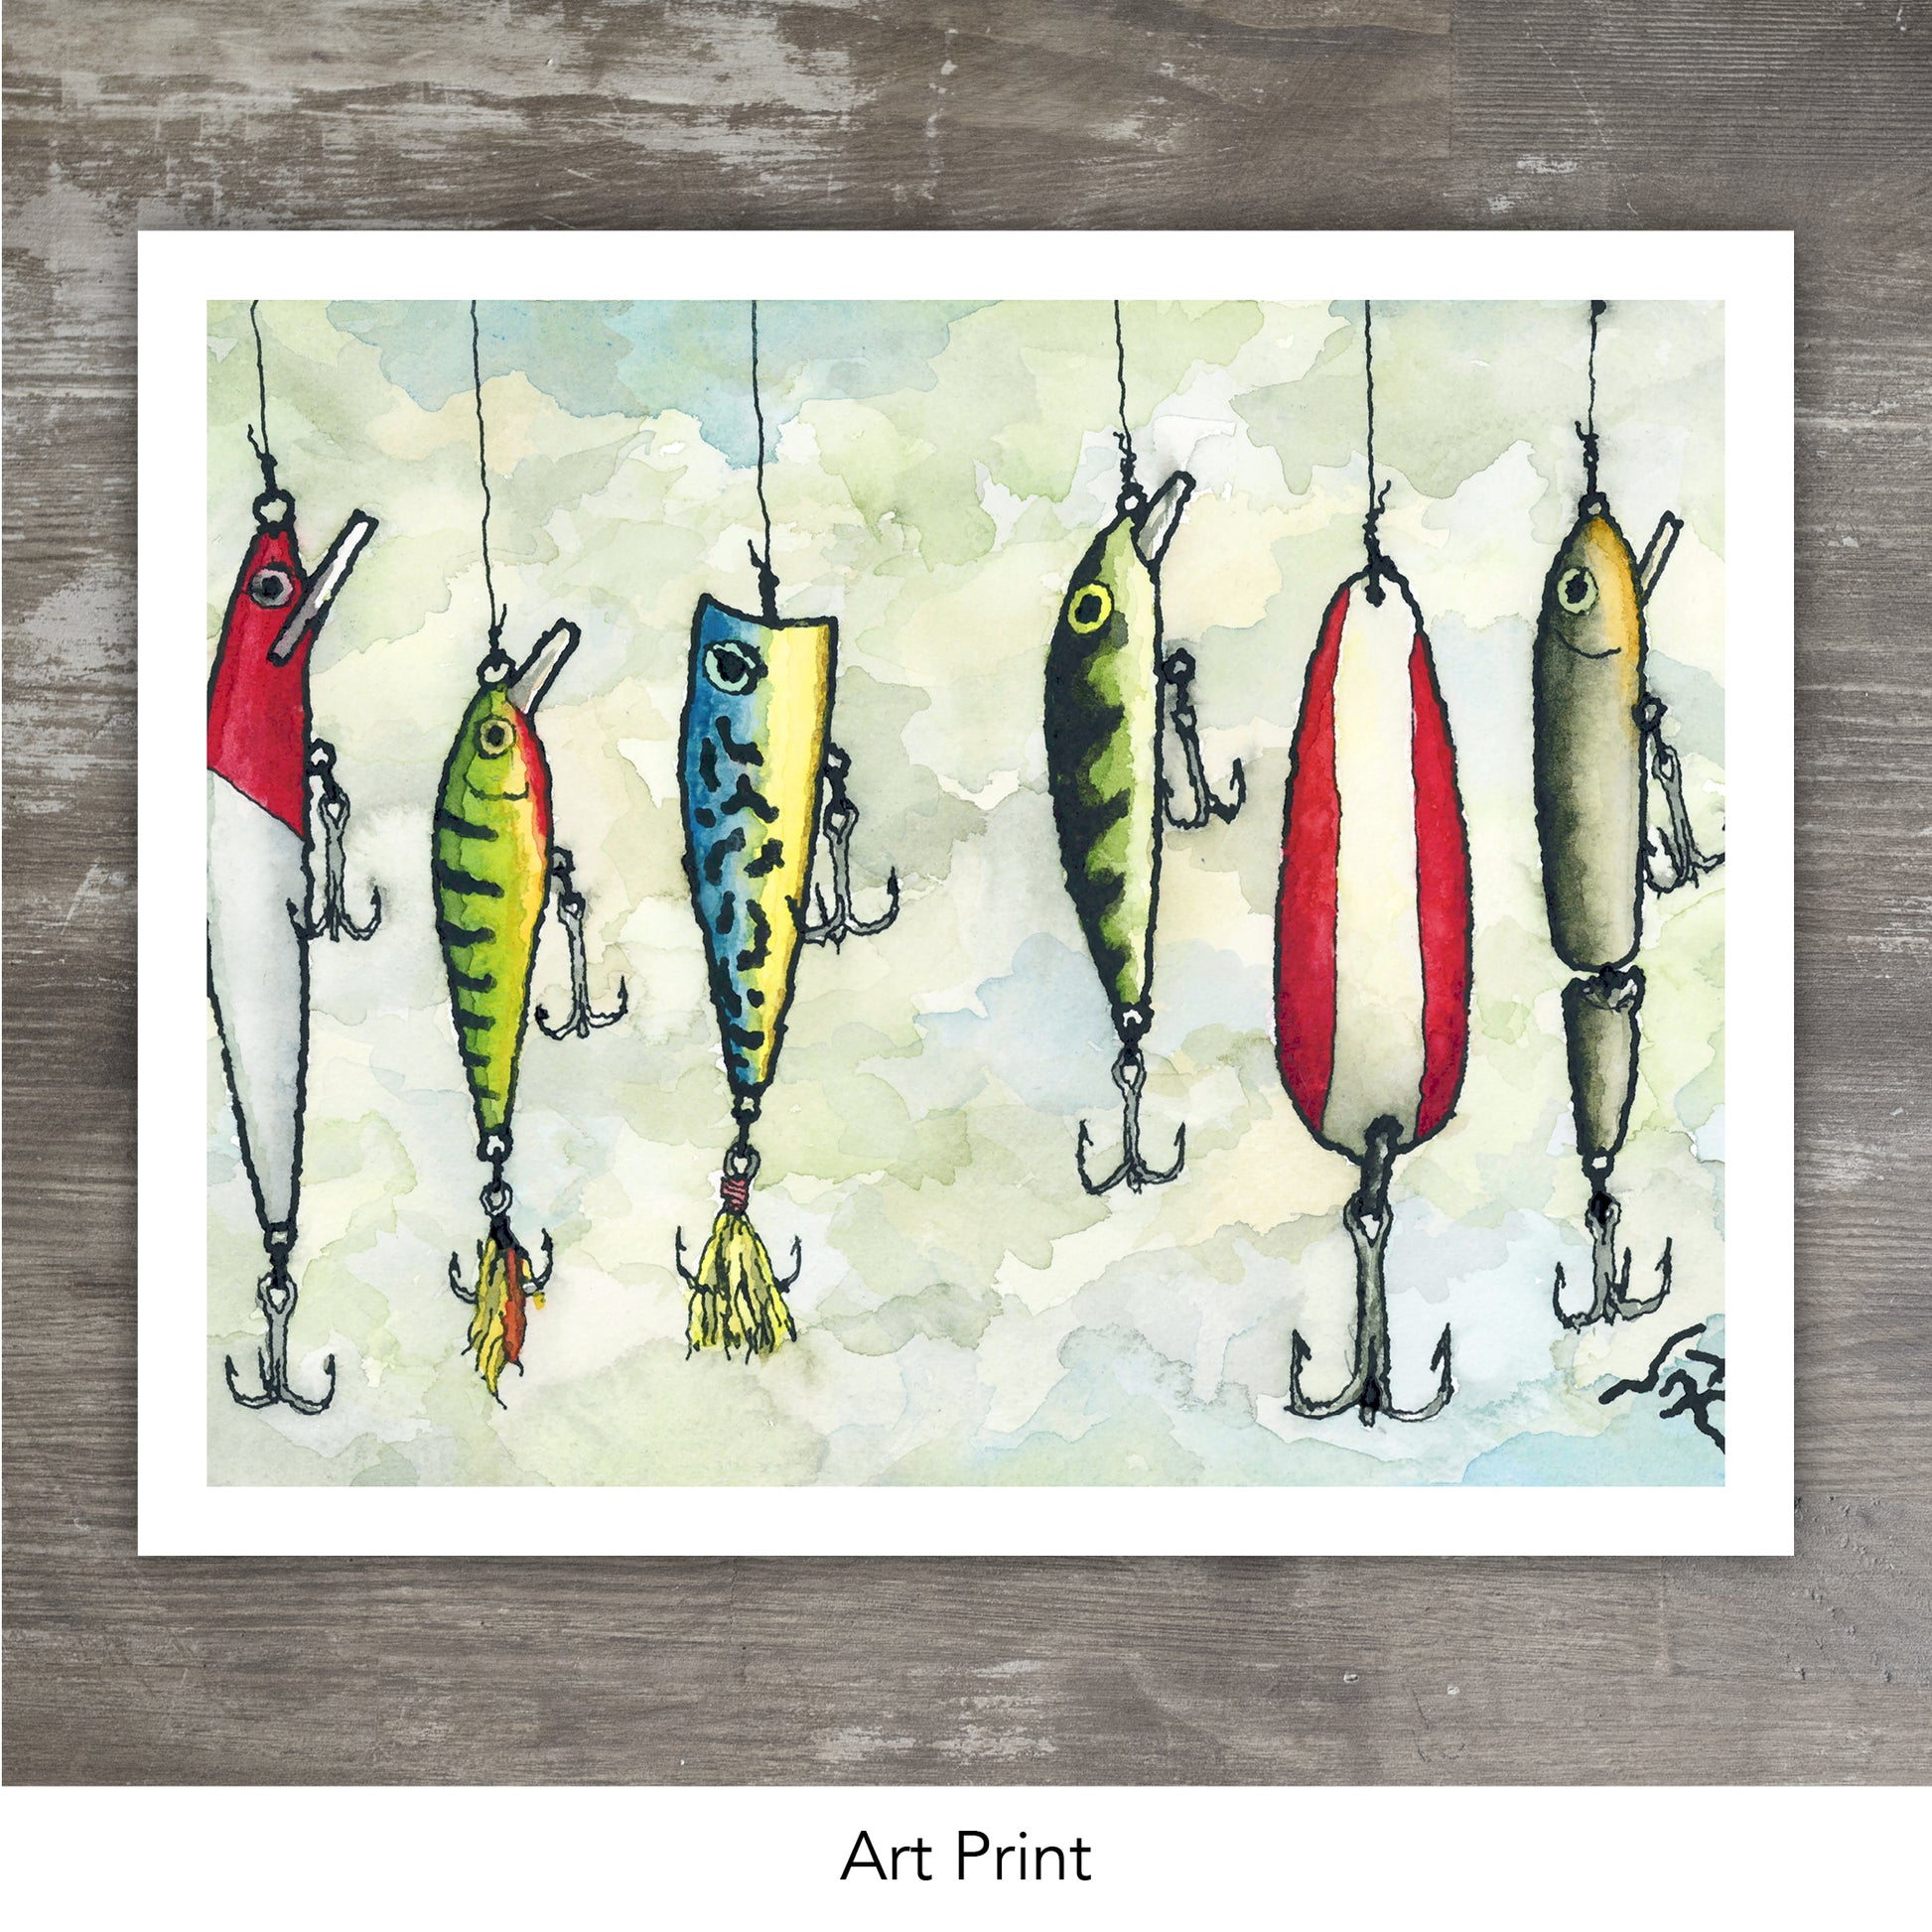 Fishing tackle, hooks and lures. Watercolor illustration on white